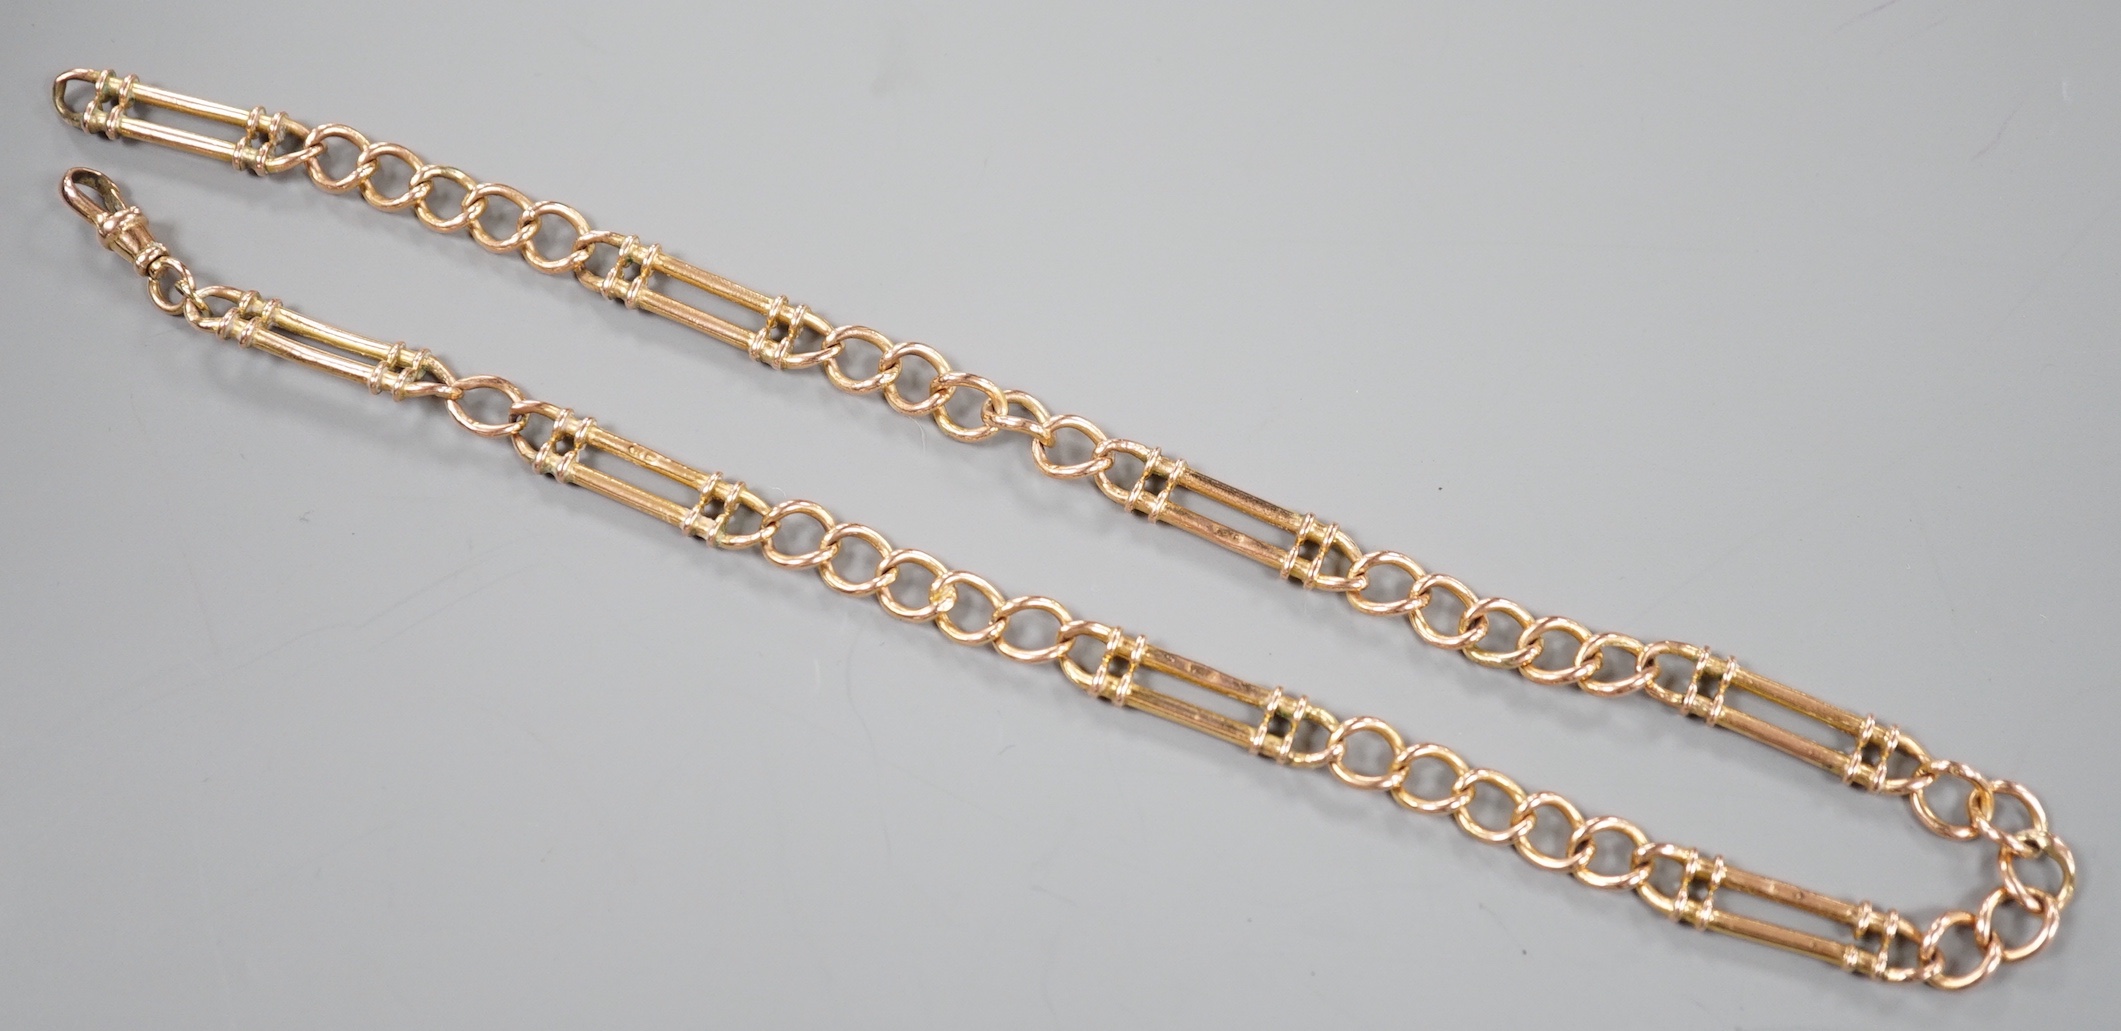 A 375 elongated and oval link chain, 43cm